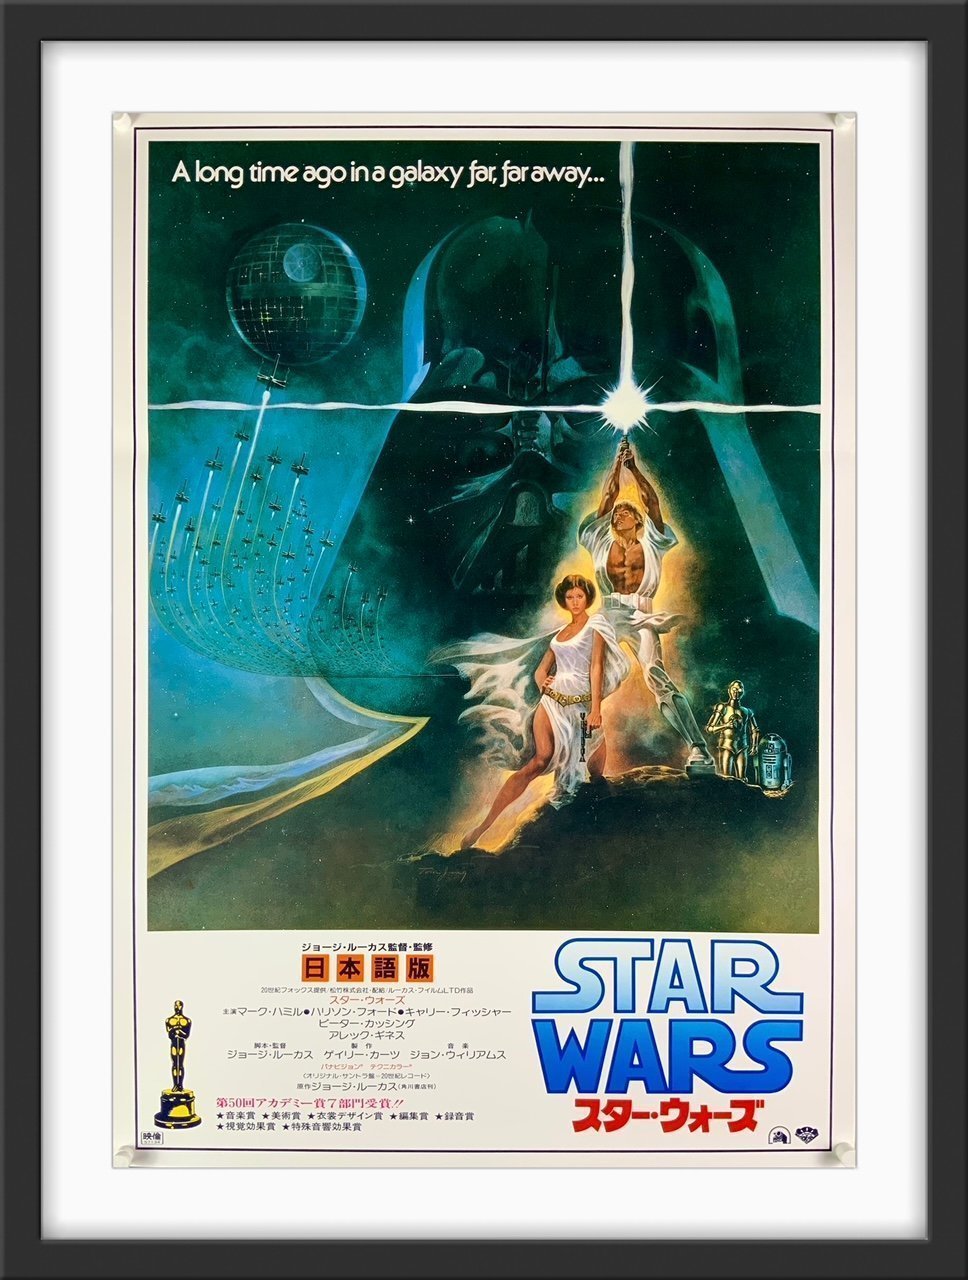 An original Japanese B2 movie poster for Star Wars (A New Hope / Episode 4)